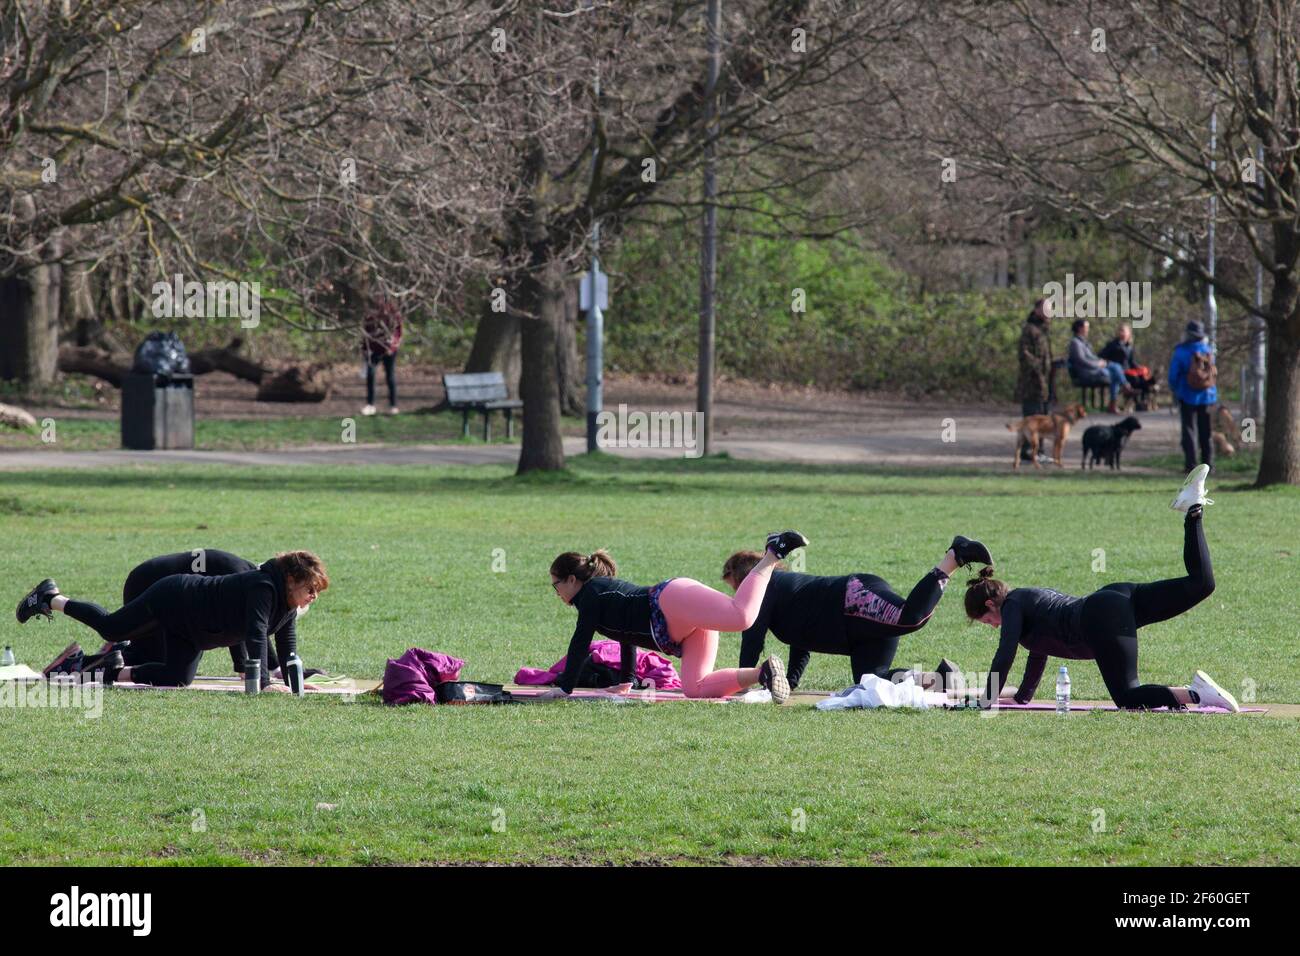 London, UK, 29 March 2021: On Tooting Commons a group of women take an outdoor exercise class, which from today is permitted under the gradual easing of lockdown rules in England. Anna Watson/Alamy Live News Stock Photo